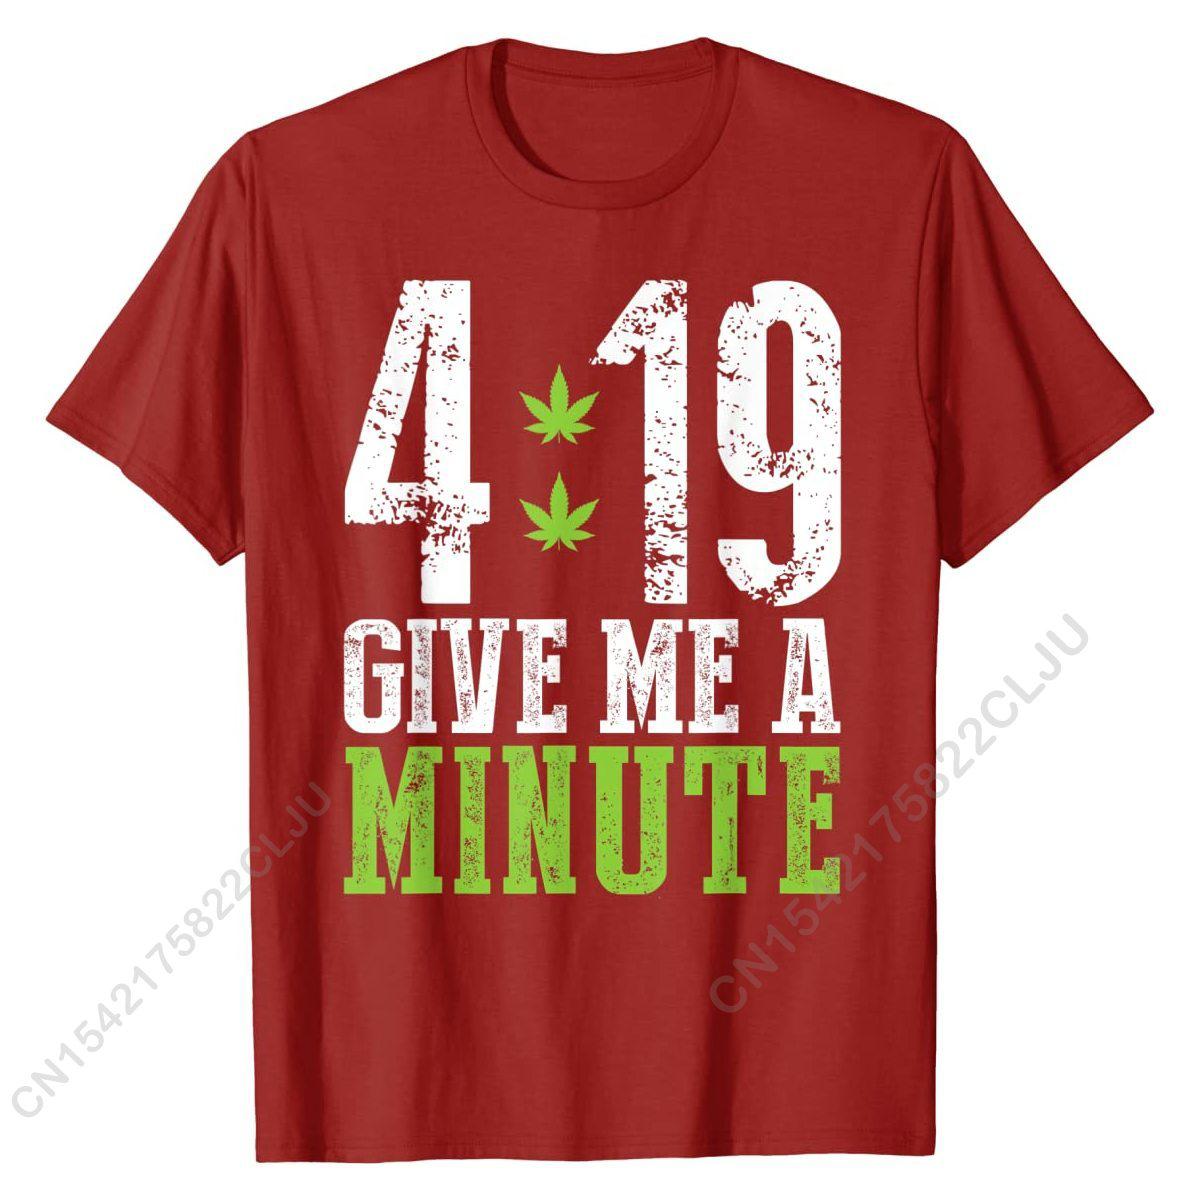 4 19 Give Me A Minute Shirt Weed 420 Stoner Gift T Shirt Crazy Cotton